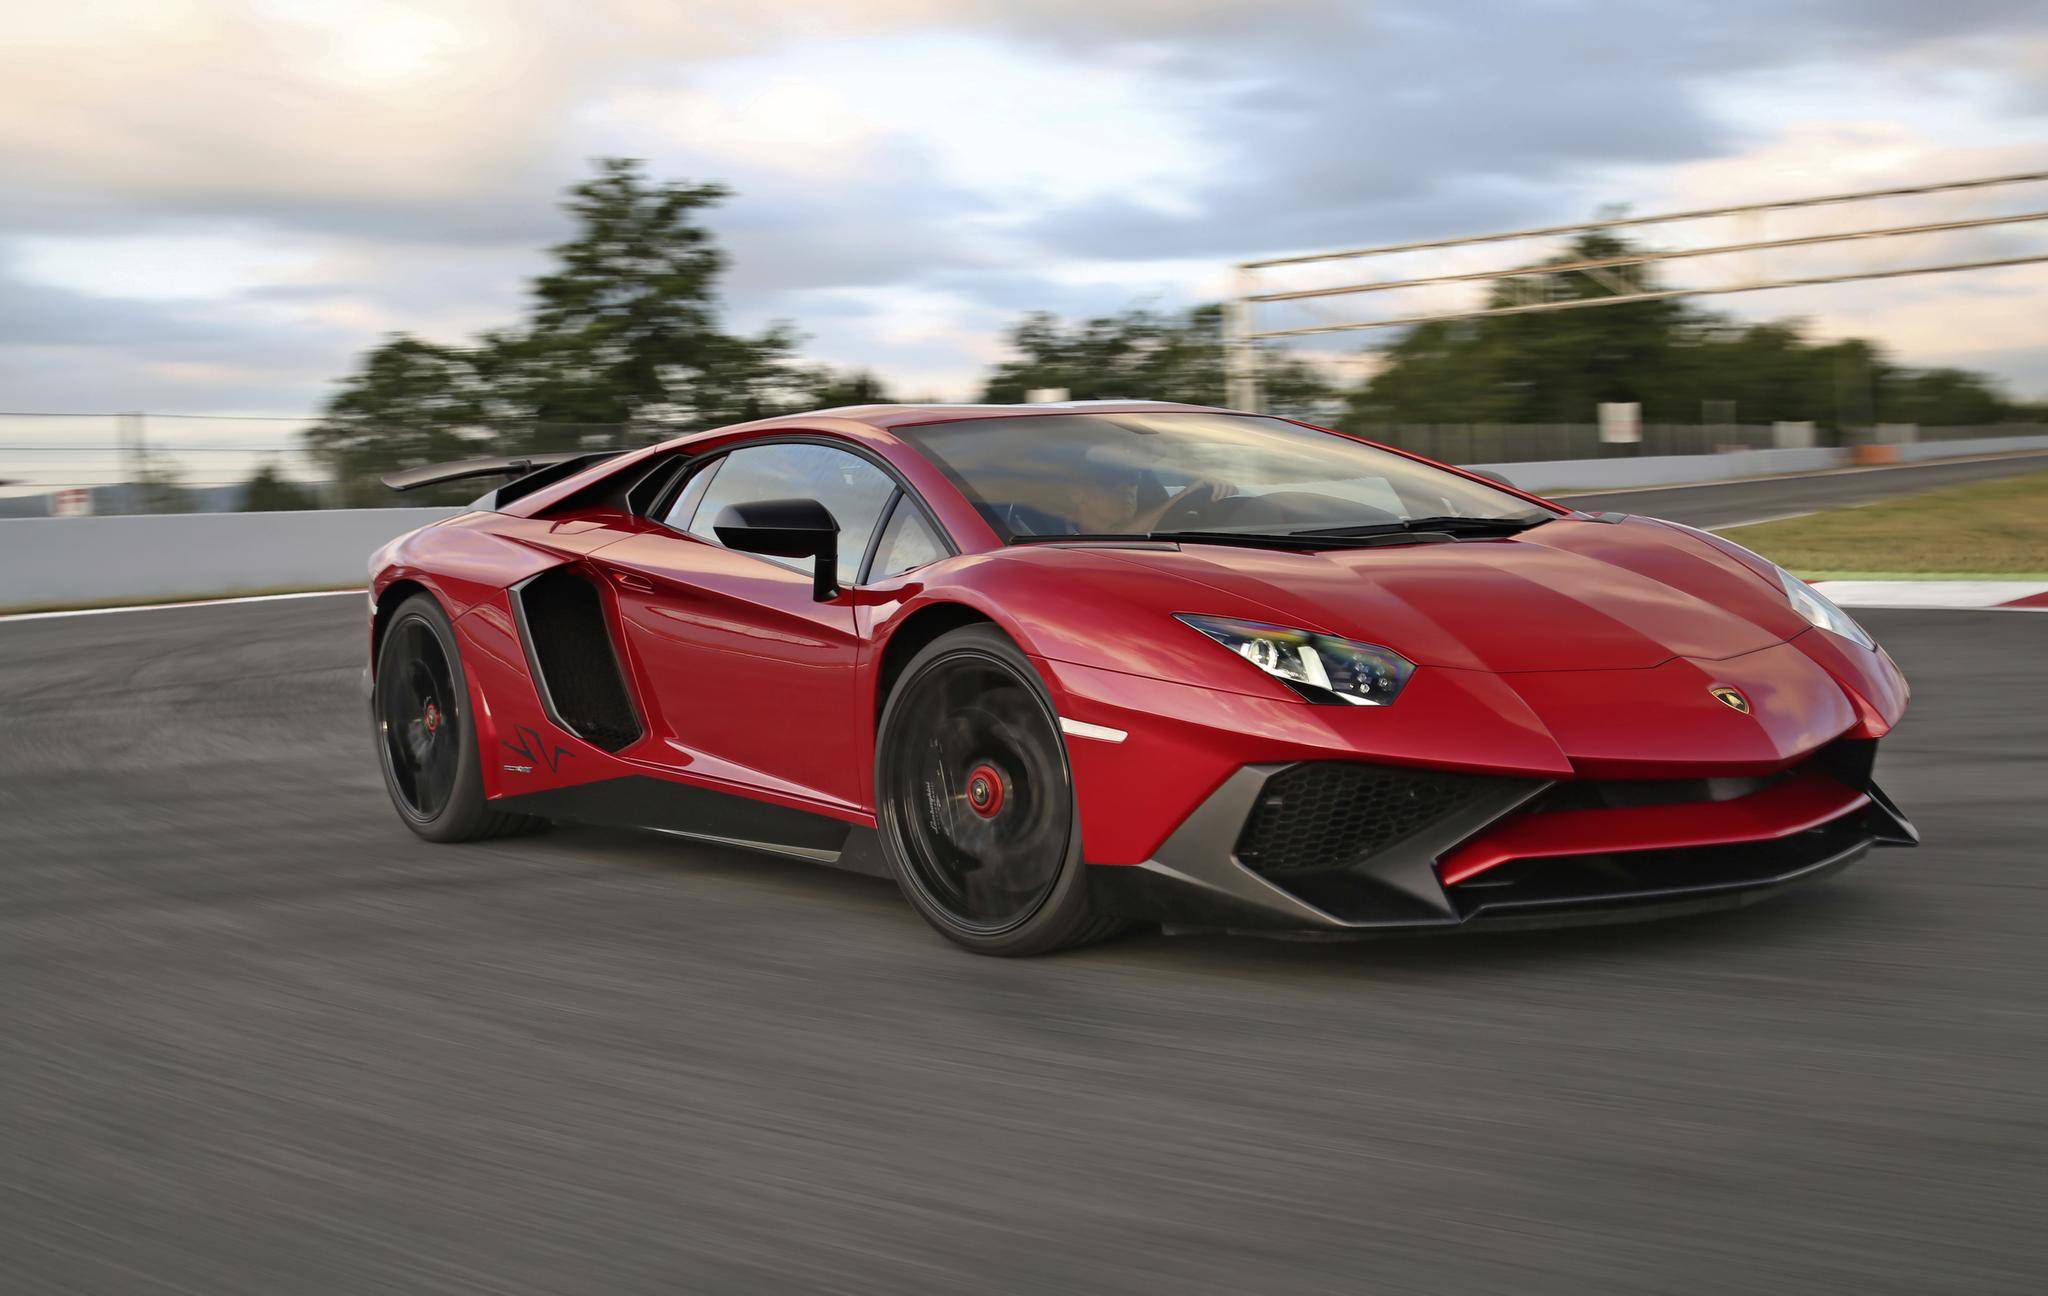 Review: Review: 2016 Lamborghini Aventador LP 750-4 Superveloce won't leave  you wanting more - The Globe and Mail